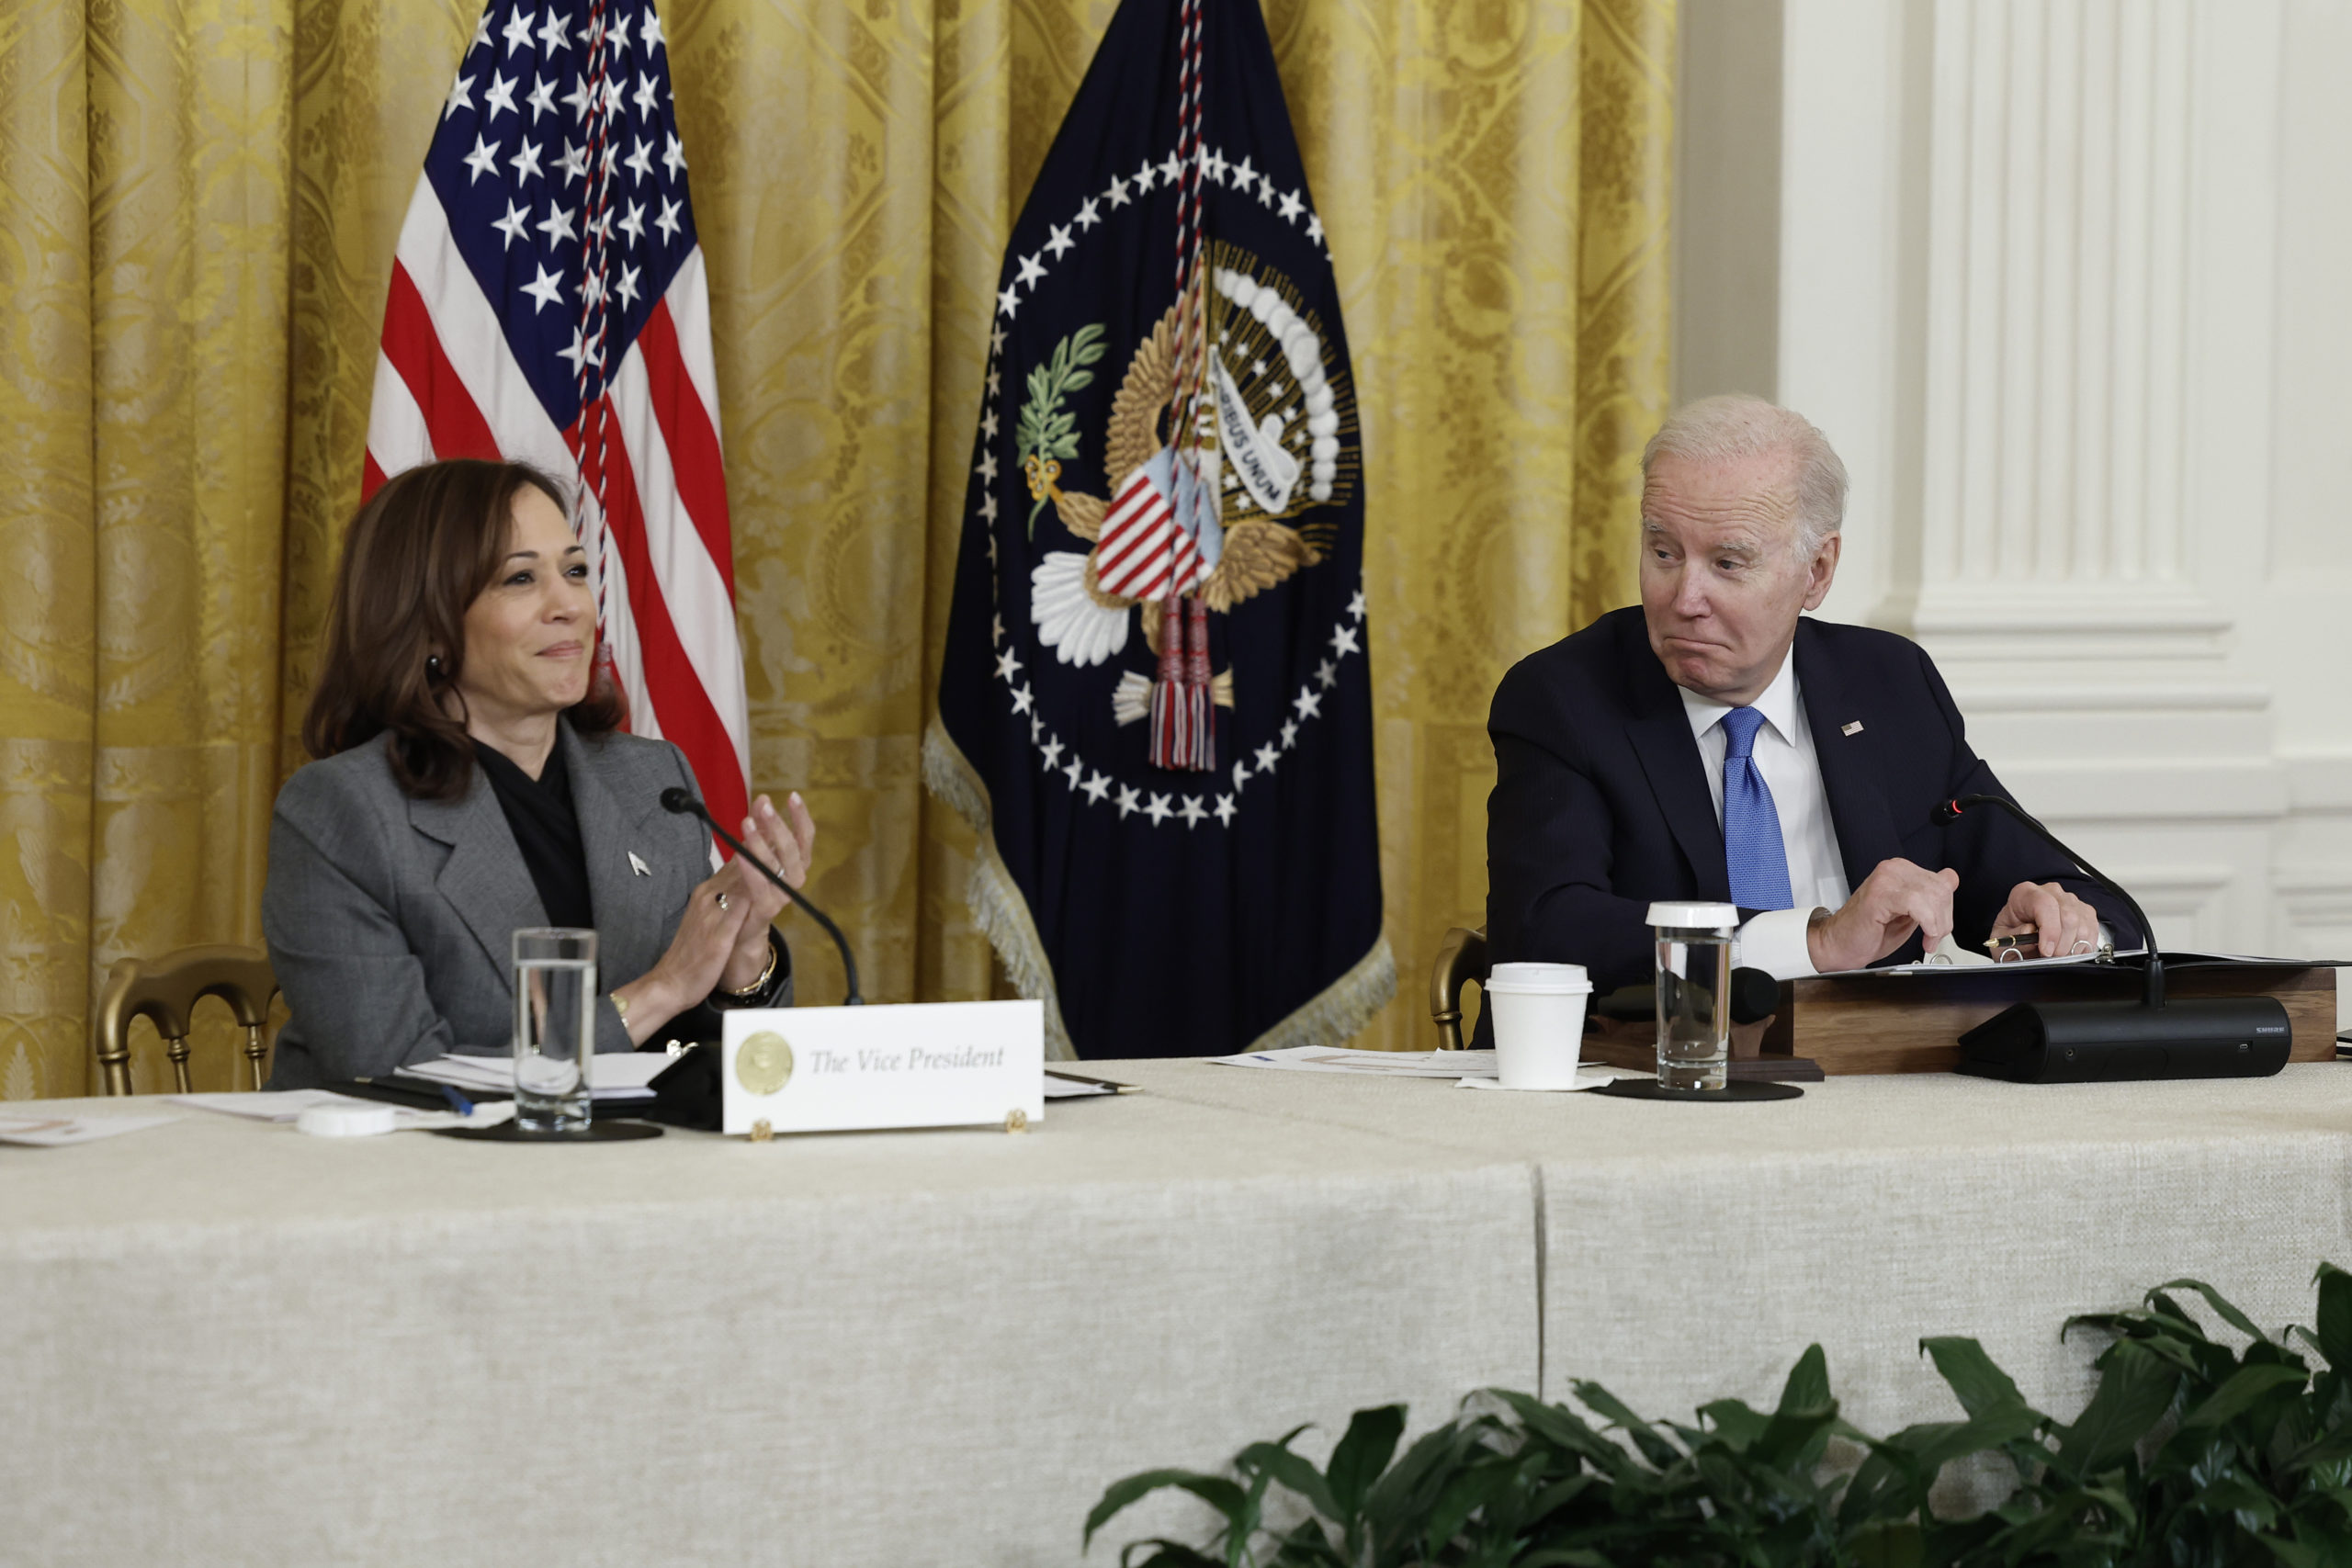 U.S. President Joe Biden and U.S. Vice President Kamala Harris participate in a meeting with governors visiting from states around the country in the East Room of the White House on February 10, 2023 in Washington, DC. This weekend President Biden is hosting governors that are attending the annual National Governors Association Winter Meeting. (Photo by Anna Moneymaker/Getty Images)